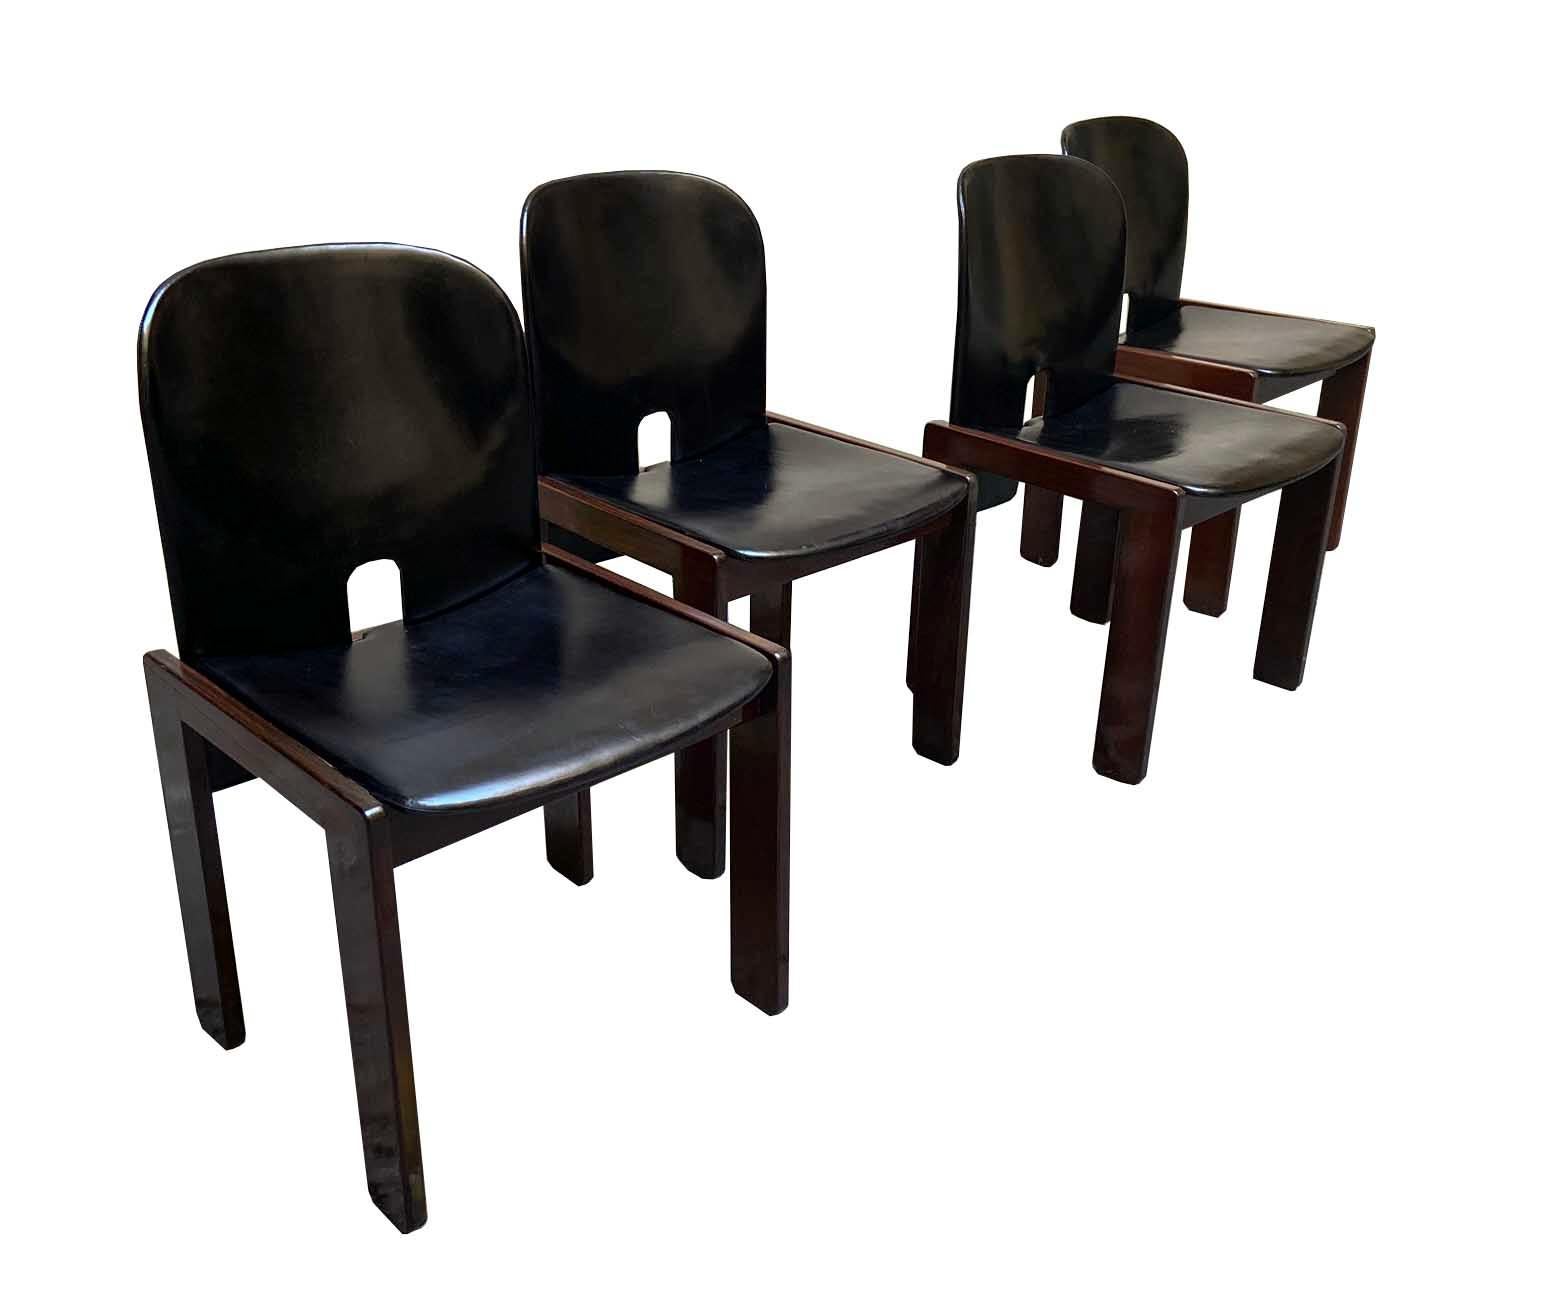 Set of four chairs model 121 designed by Afra & Tobia Scarpa in 1965. wood structure and black leather.
